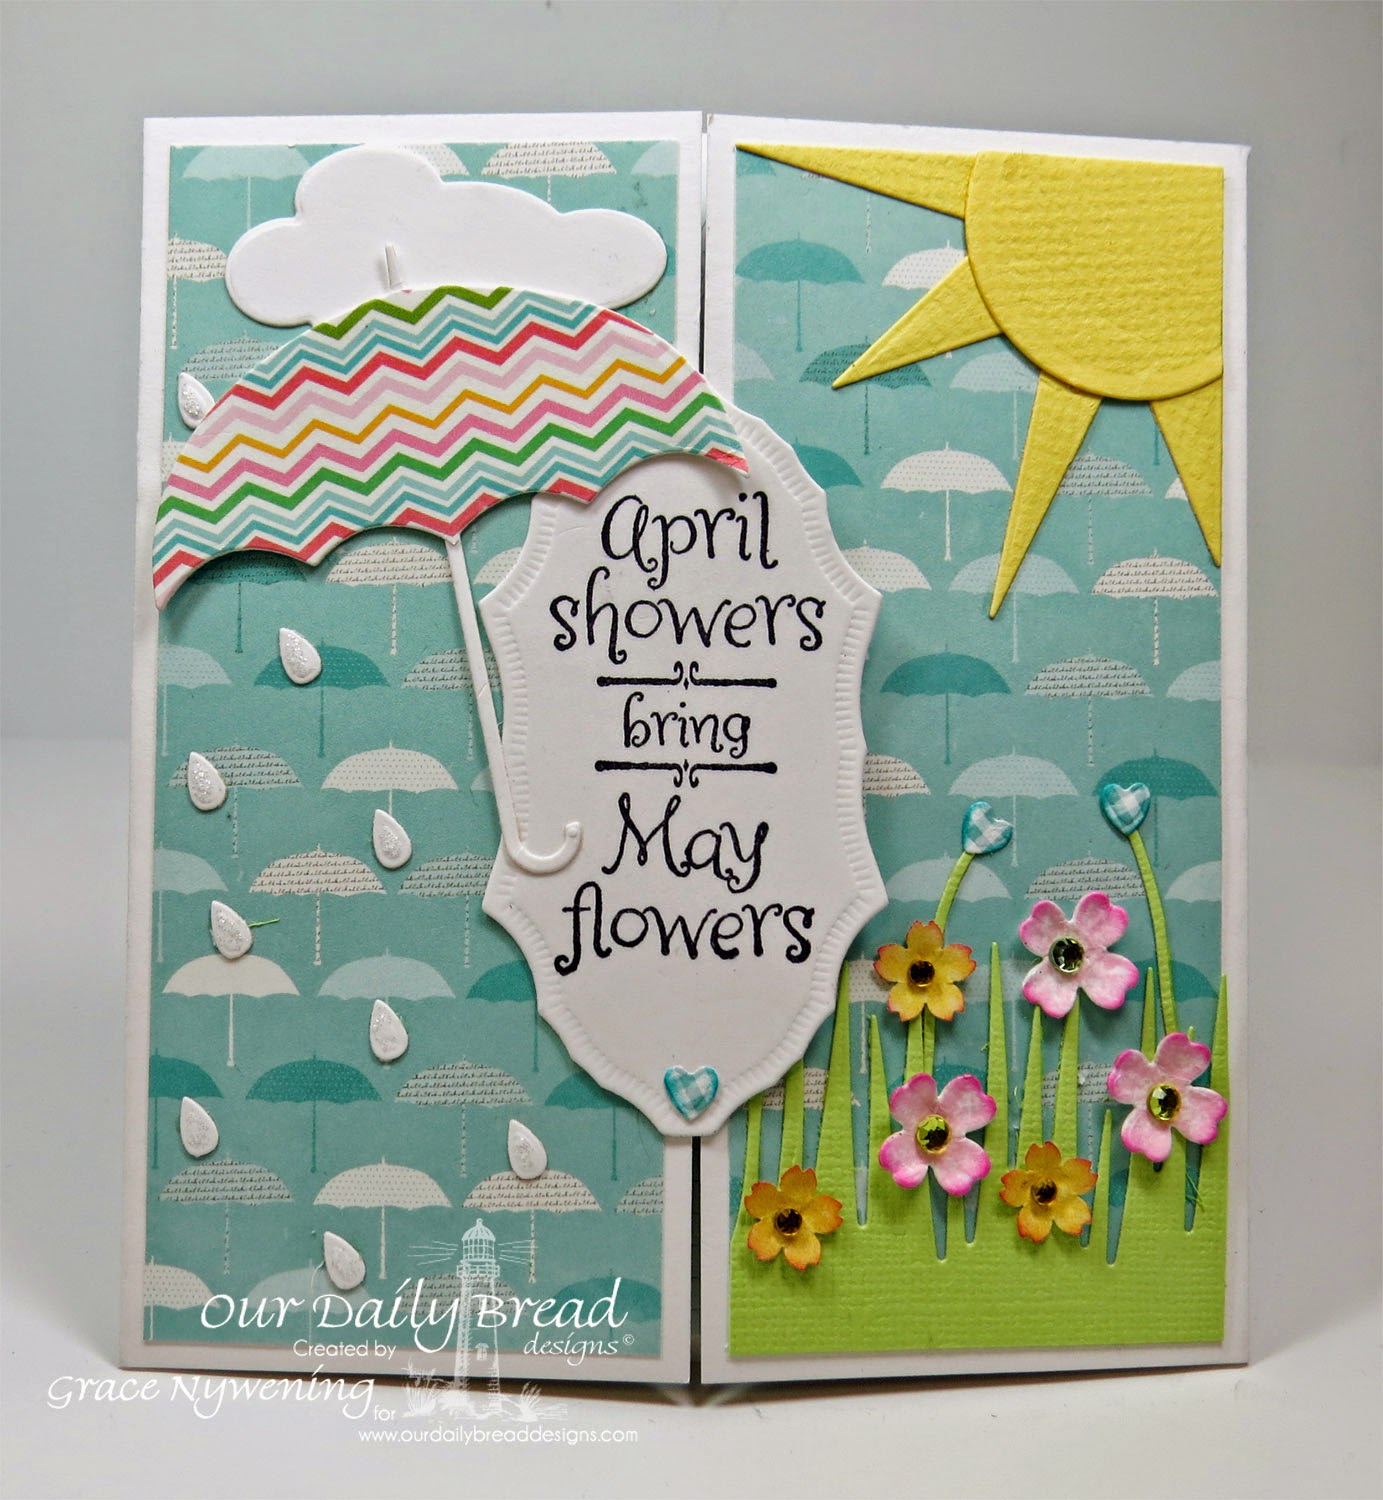 ODBD stamps- April Showers, designed by Grace Nywening